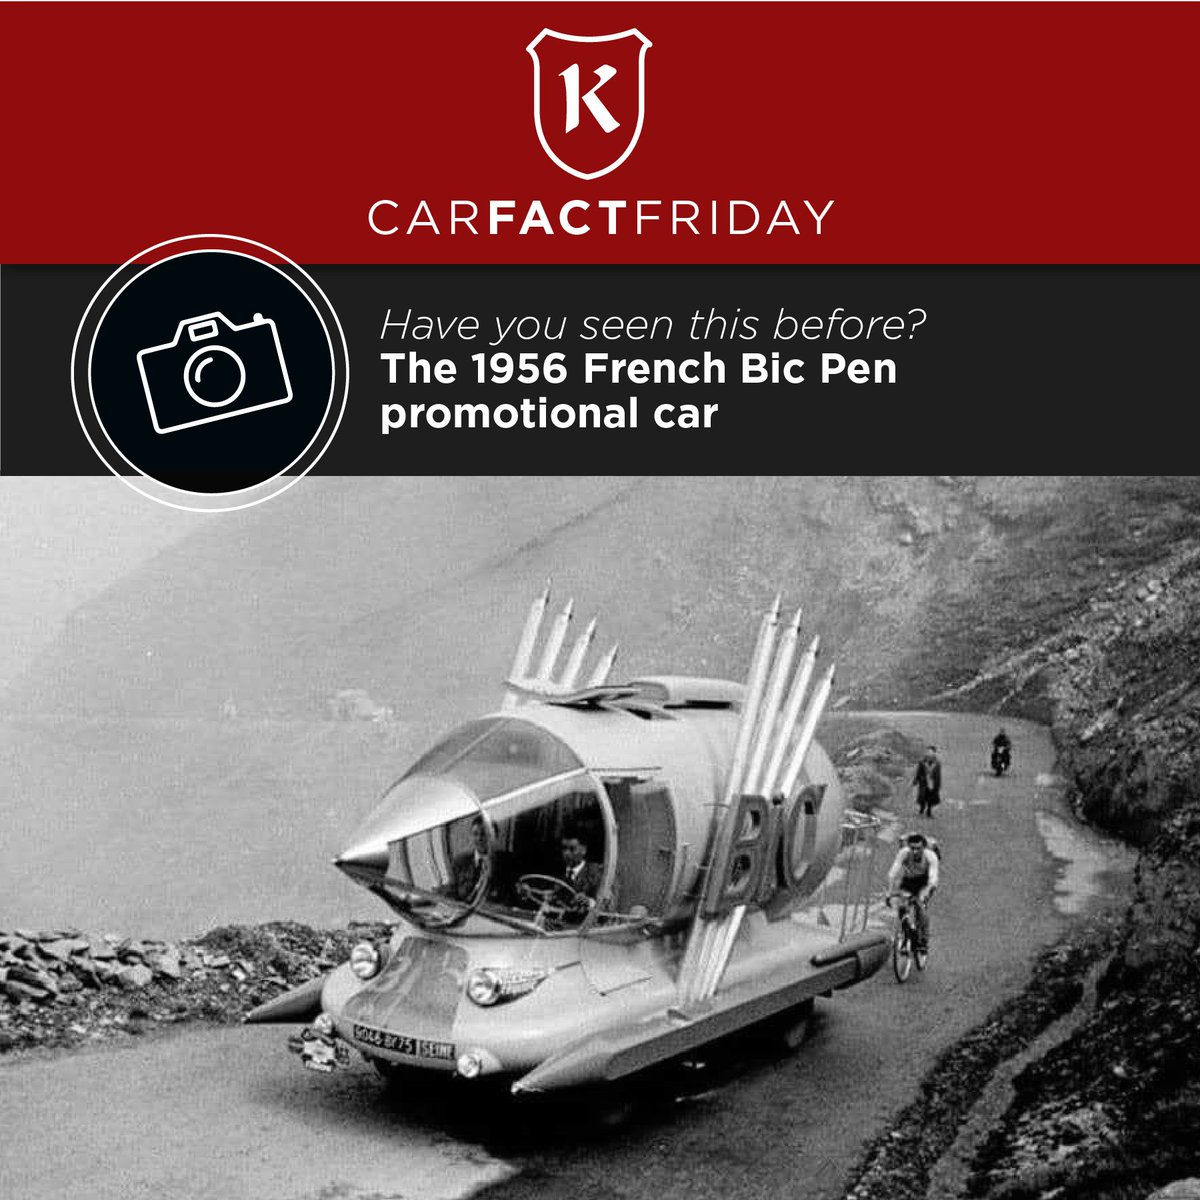 Car Fact Friday with Knight’s Auto Repair!
-
-
#carfact #factfriday #tgif #autoshop #mechanic #carmaintenance #auto #Ledgewood #familyowned #familyoperated #reliable #dedicated #family #trusted #AAA #local